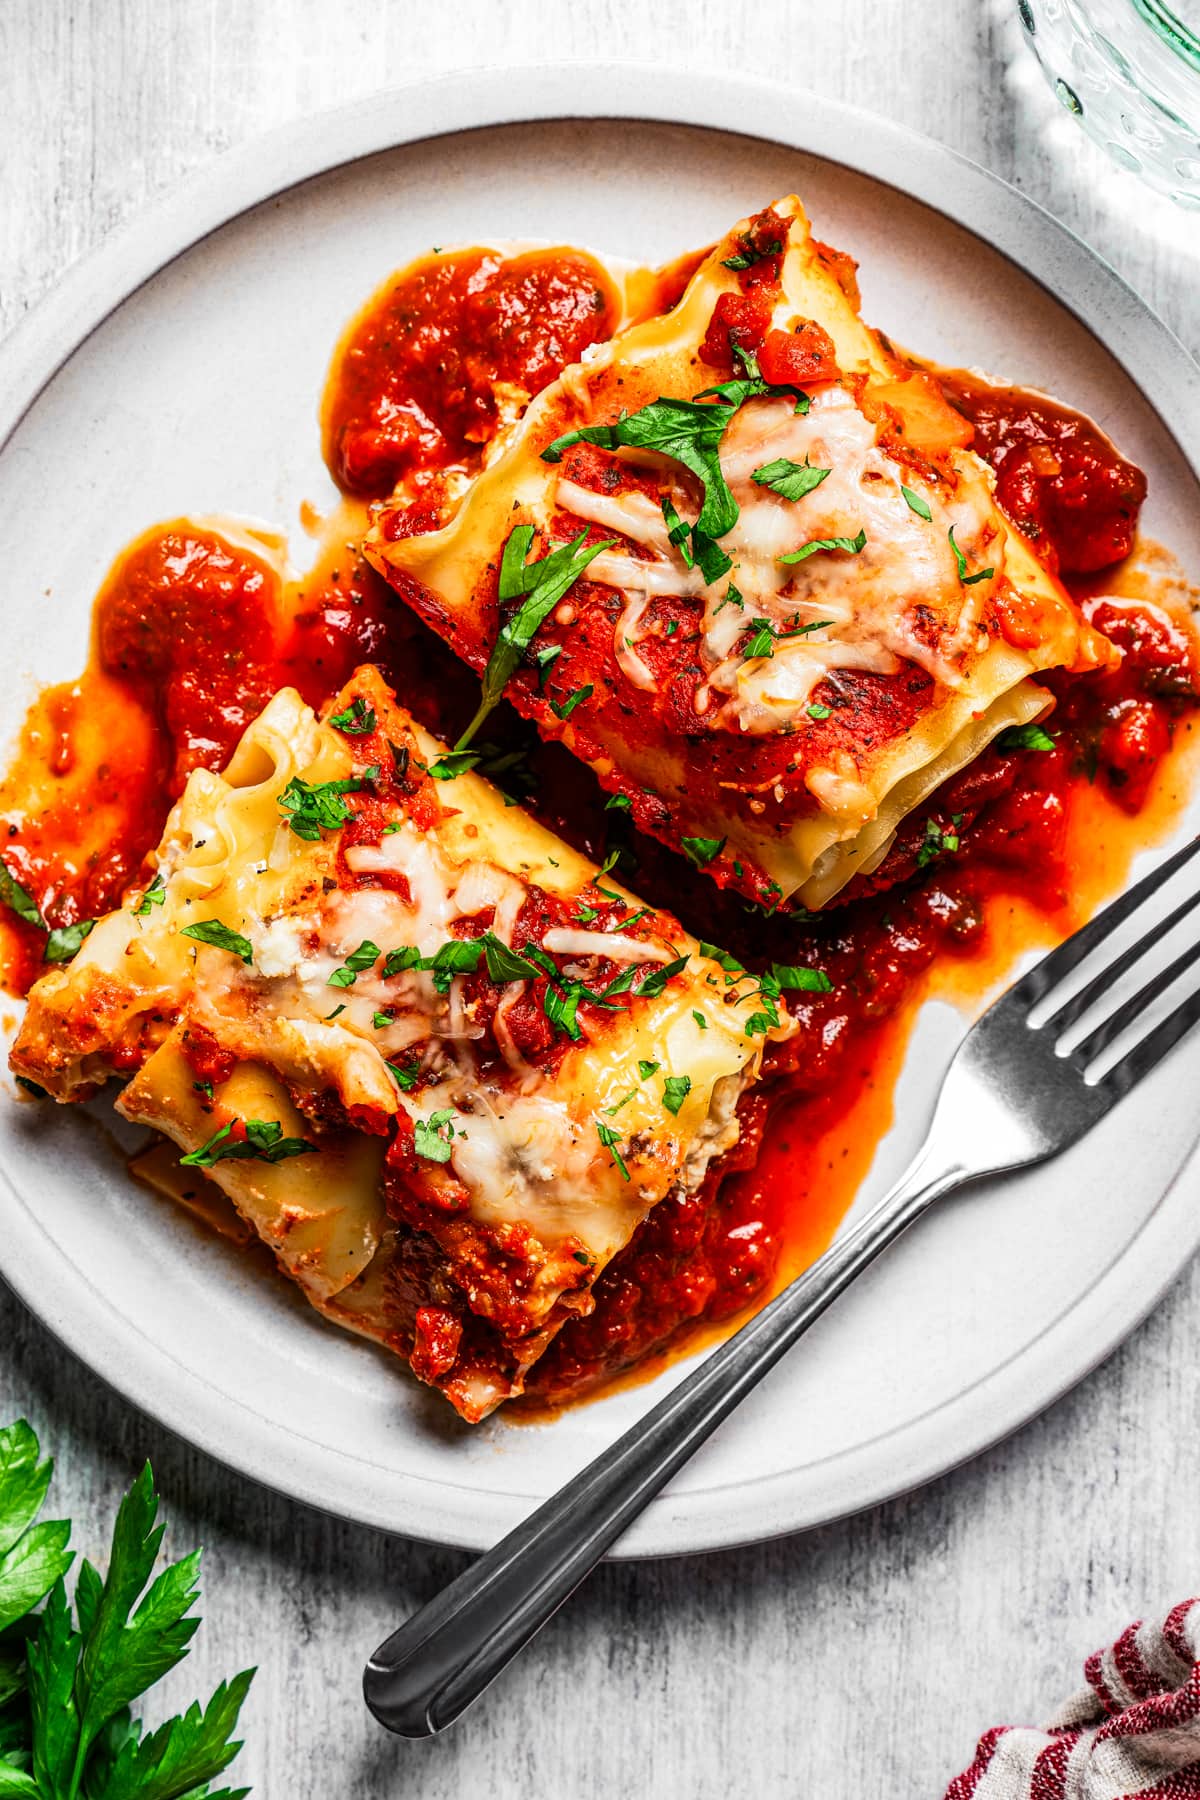 Overhead close-up view of two lasagna roll ups served on a white plate next to a fork.